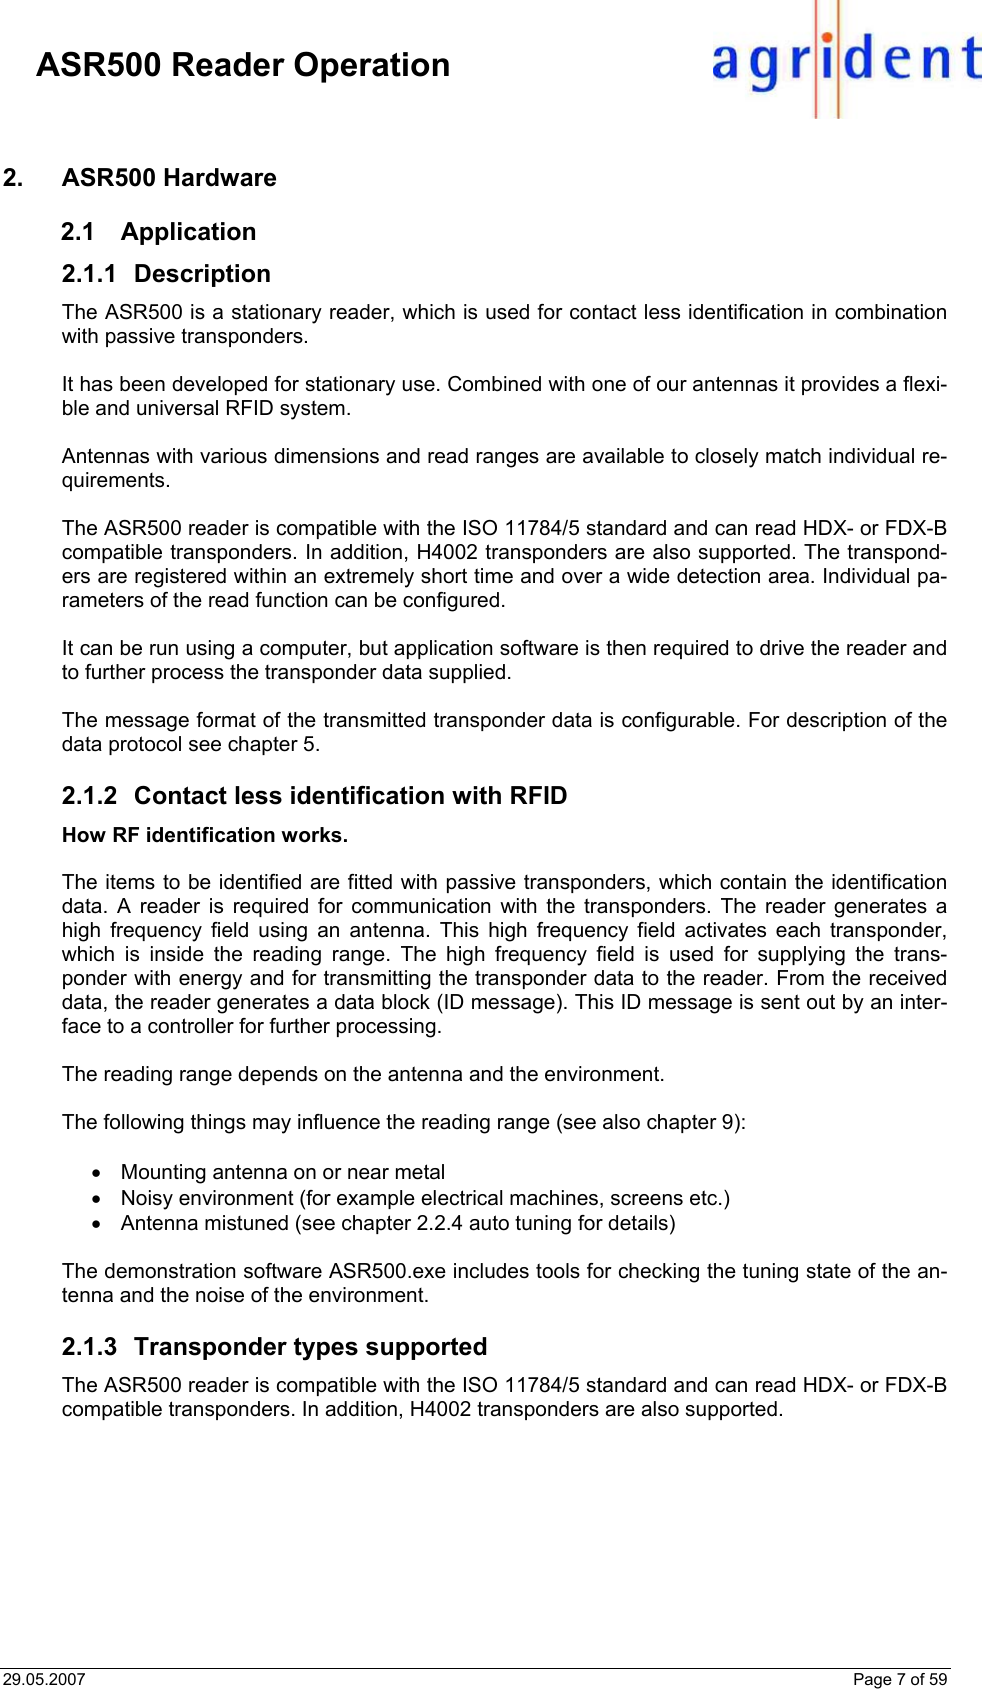 29.05.2007    Page 7 of 59     ASR500 Reader Operation 2. ASR500 Hardware 2.1 Application 2.1.1 Description The ASR500 is a stationary reader, which is used for contact less identification in combination with passive transponders.  It has been developed for stationary use. Combined with one of our antennas it provides a flexi-ble and universal RFID system.  Antennas with various dimensions and read ranges are available to closely match individual re-quirements.   The ASR500 reader is compatible with the ISO 11784/5 standard and can read HDX- or FDX-B compatible transponders. In addition, H4002 transponders are also supported. The transpond-ers are registered within an extremely short time and over a wide detection area. Individual pa-rameters of the read function can be configured.  It can be run using a computer, but application software is then required to drive the reader and to further process the transponder data supplied.  The message format of the transmitted transponder data is configurable. For description of the data protocol see chapter 5.  2.1.2  Contact less identification with RFID How RF identification works.  The items to be identified are fitted with passive transponders, which contain the identification data. A reader is required for communication with the transponders. The reader generates a high frequency field using an antenna. This high frequency field activates each transponder, which is inside the reading range. The high frequency field is used for supplying the trans-ponder with energy and for transmitting the transponder data to the reader. From the received data, the reader generates a data block (ID message). This ID message is sent out by an inter-face to a controller for further processing.  The reading range depends on the antenna and the environment.  The following things may influence the reading range (see also chapter 9):  •  Mounting antenna on or near metal •  Noisy environment (for example electrical machines, screens etc.) •  Antenna mistuned (see chapter 2.2.4 auto tuning for details)  The demonstration software ASR500.exe includes tools for checking the tuning state of the an-tenna and the noise of the environment.  2.1.3  Transponder types supported The ASR500 reader is compatible with the ISO 11784/5 standard and can read HDX- or FDX-B compatible transponders. In addition, H4002 transponders are also supported.    